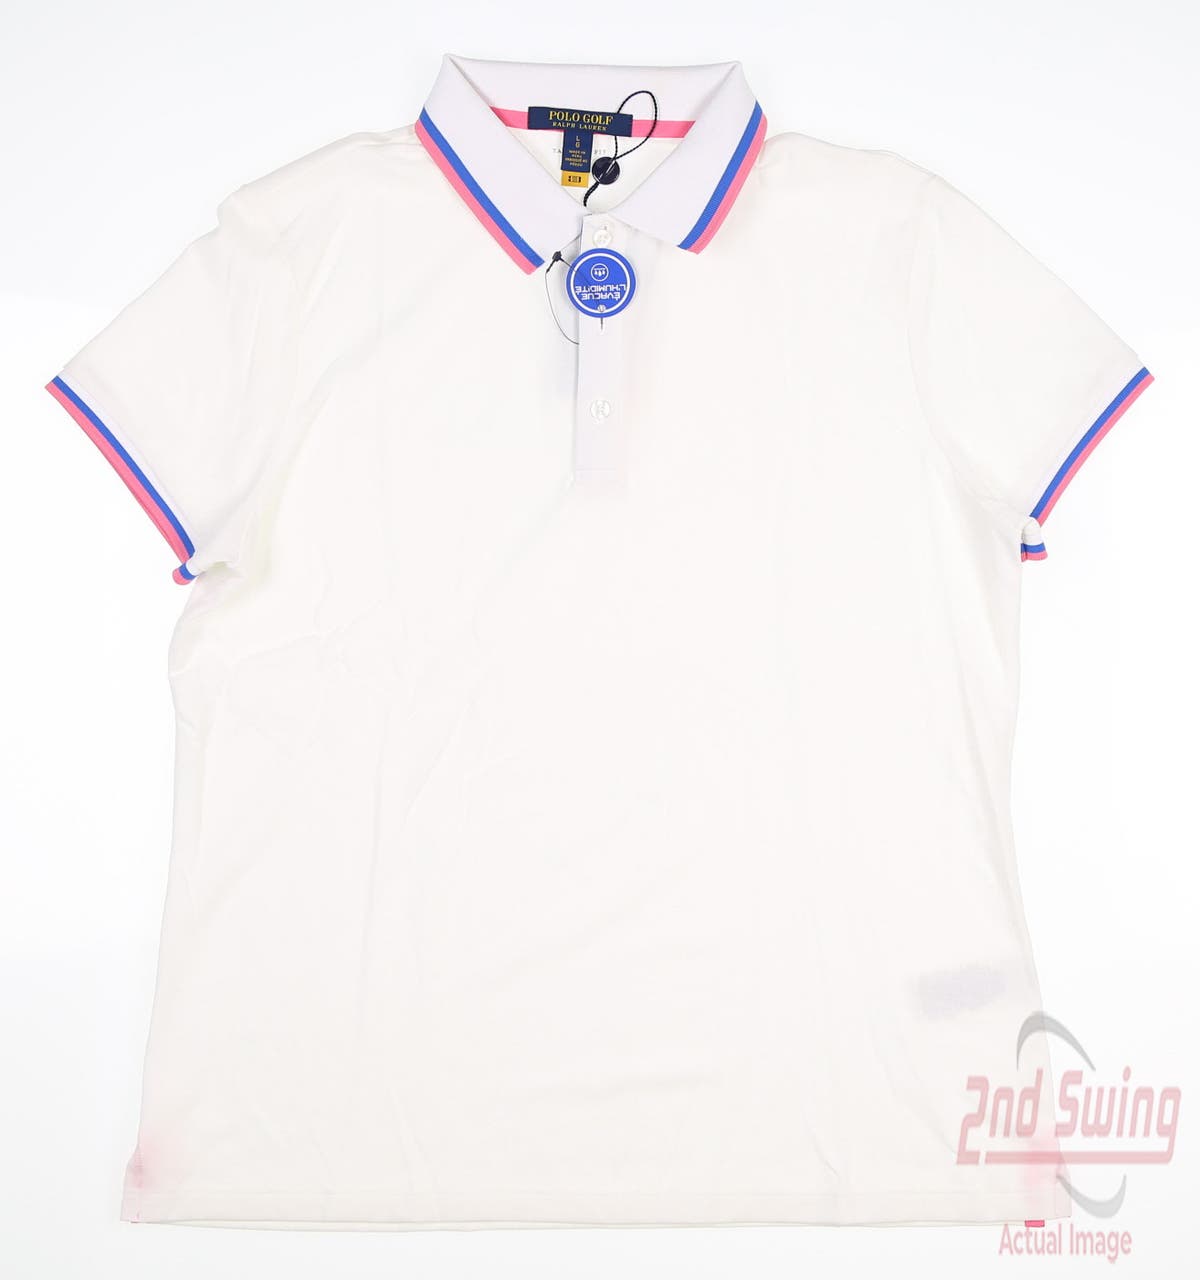 New Womens Ralph Lauren Golf Polo Large L White MSRP $90 281833910003